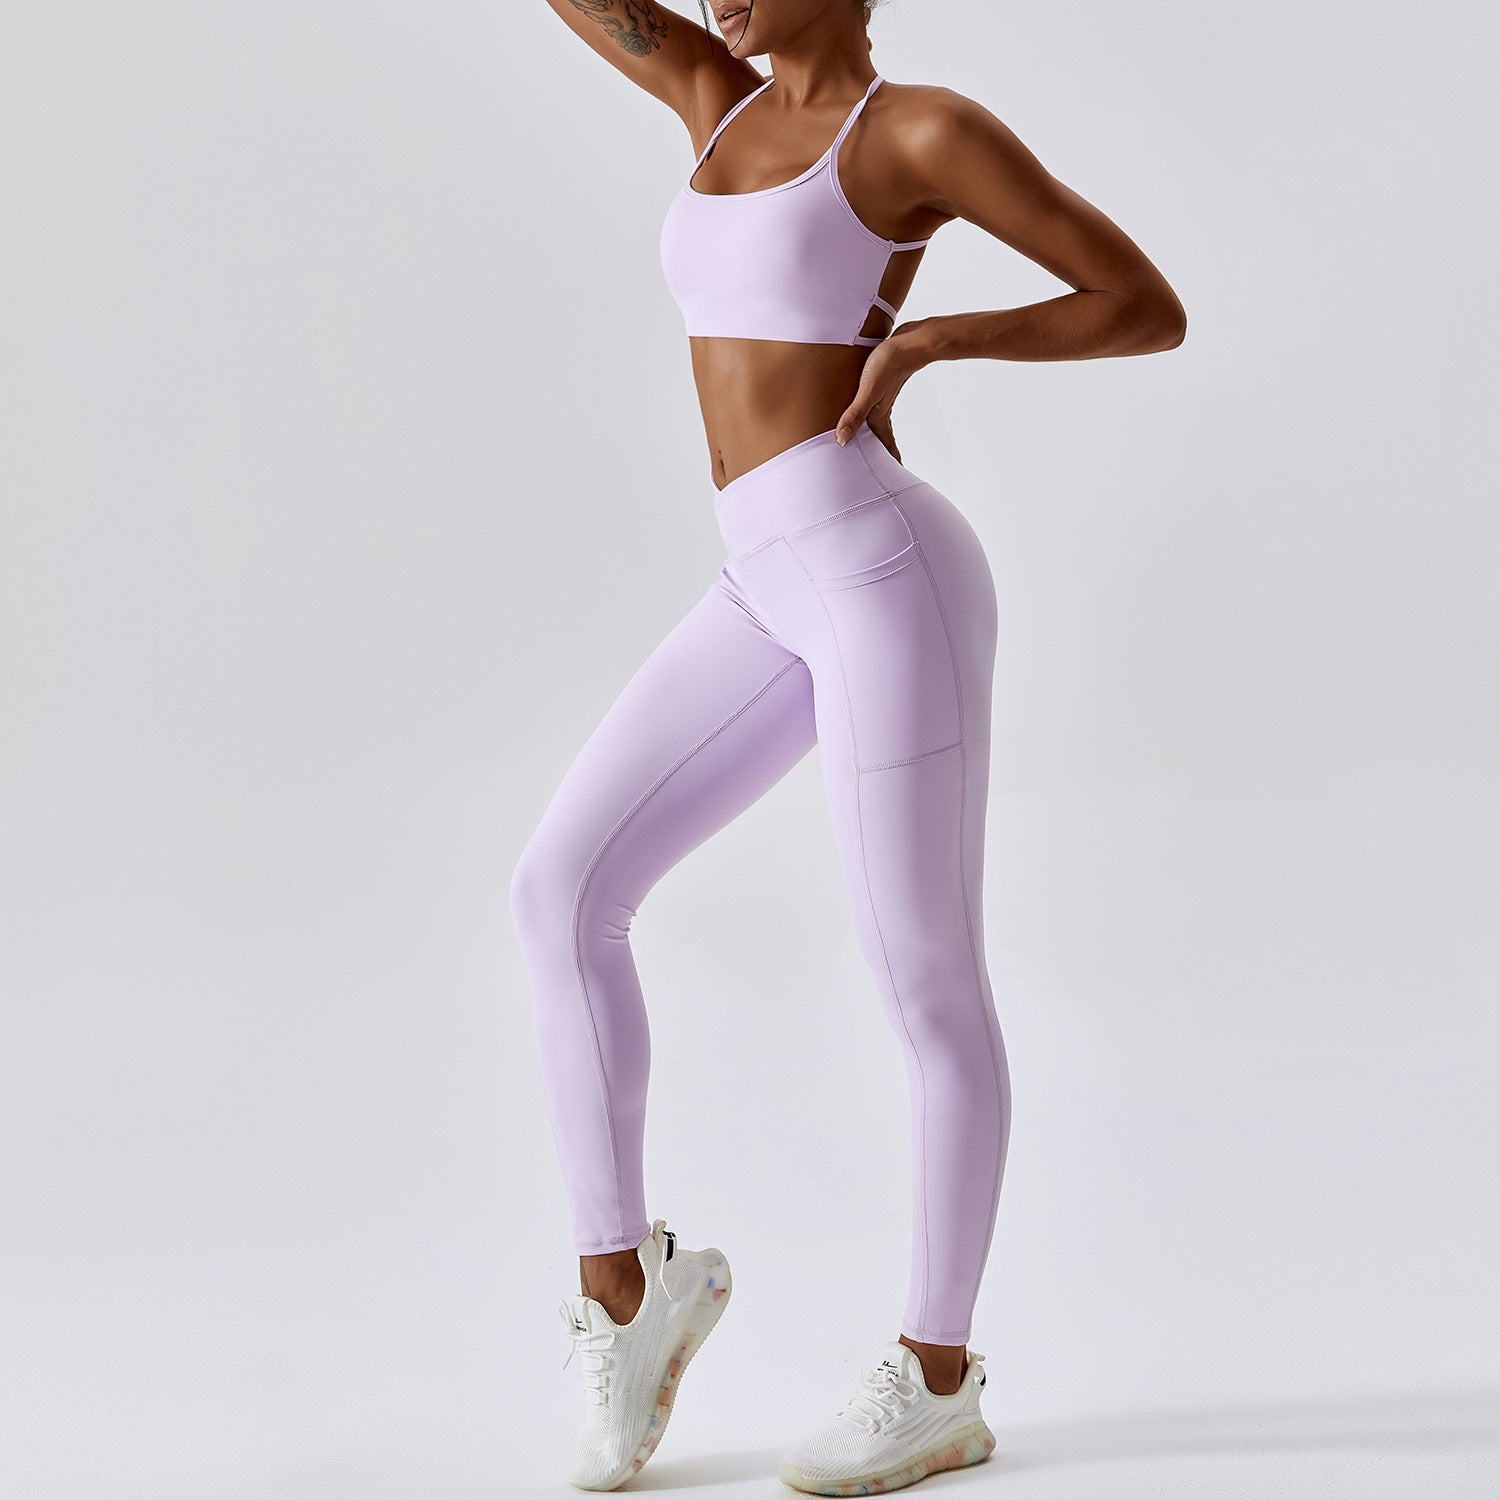 2023 Fashion Trends  Lilac Lavender Halter Sports Bra and Shorts